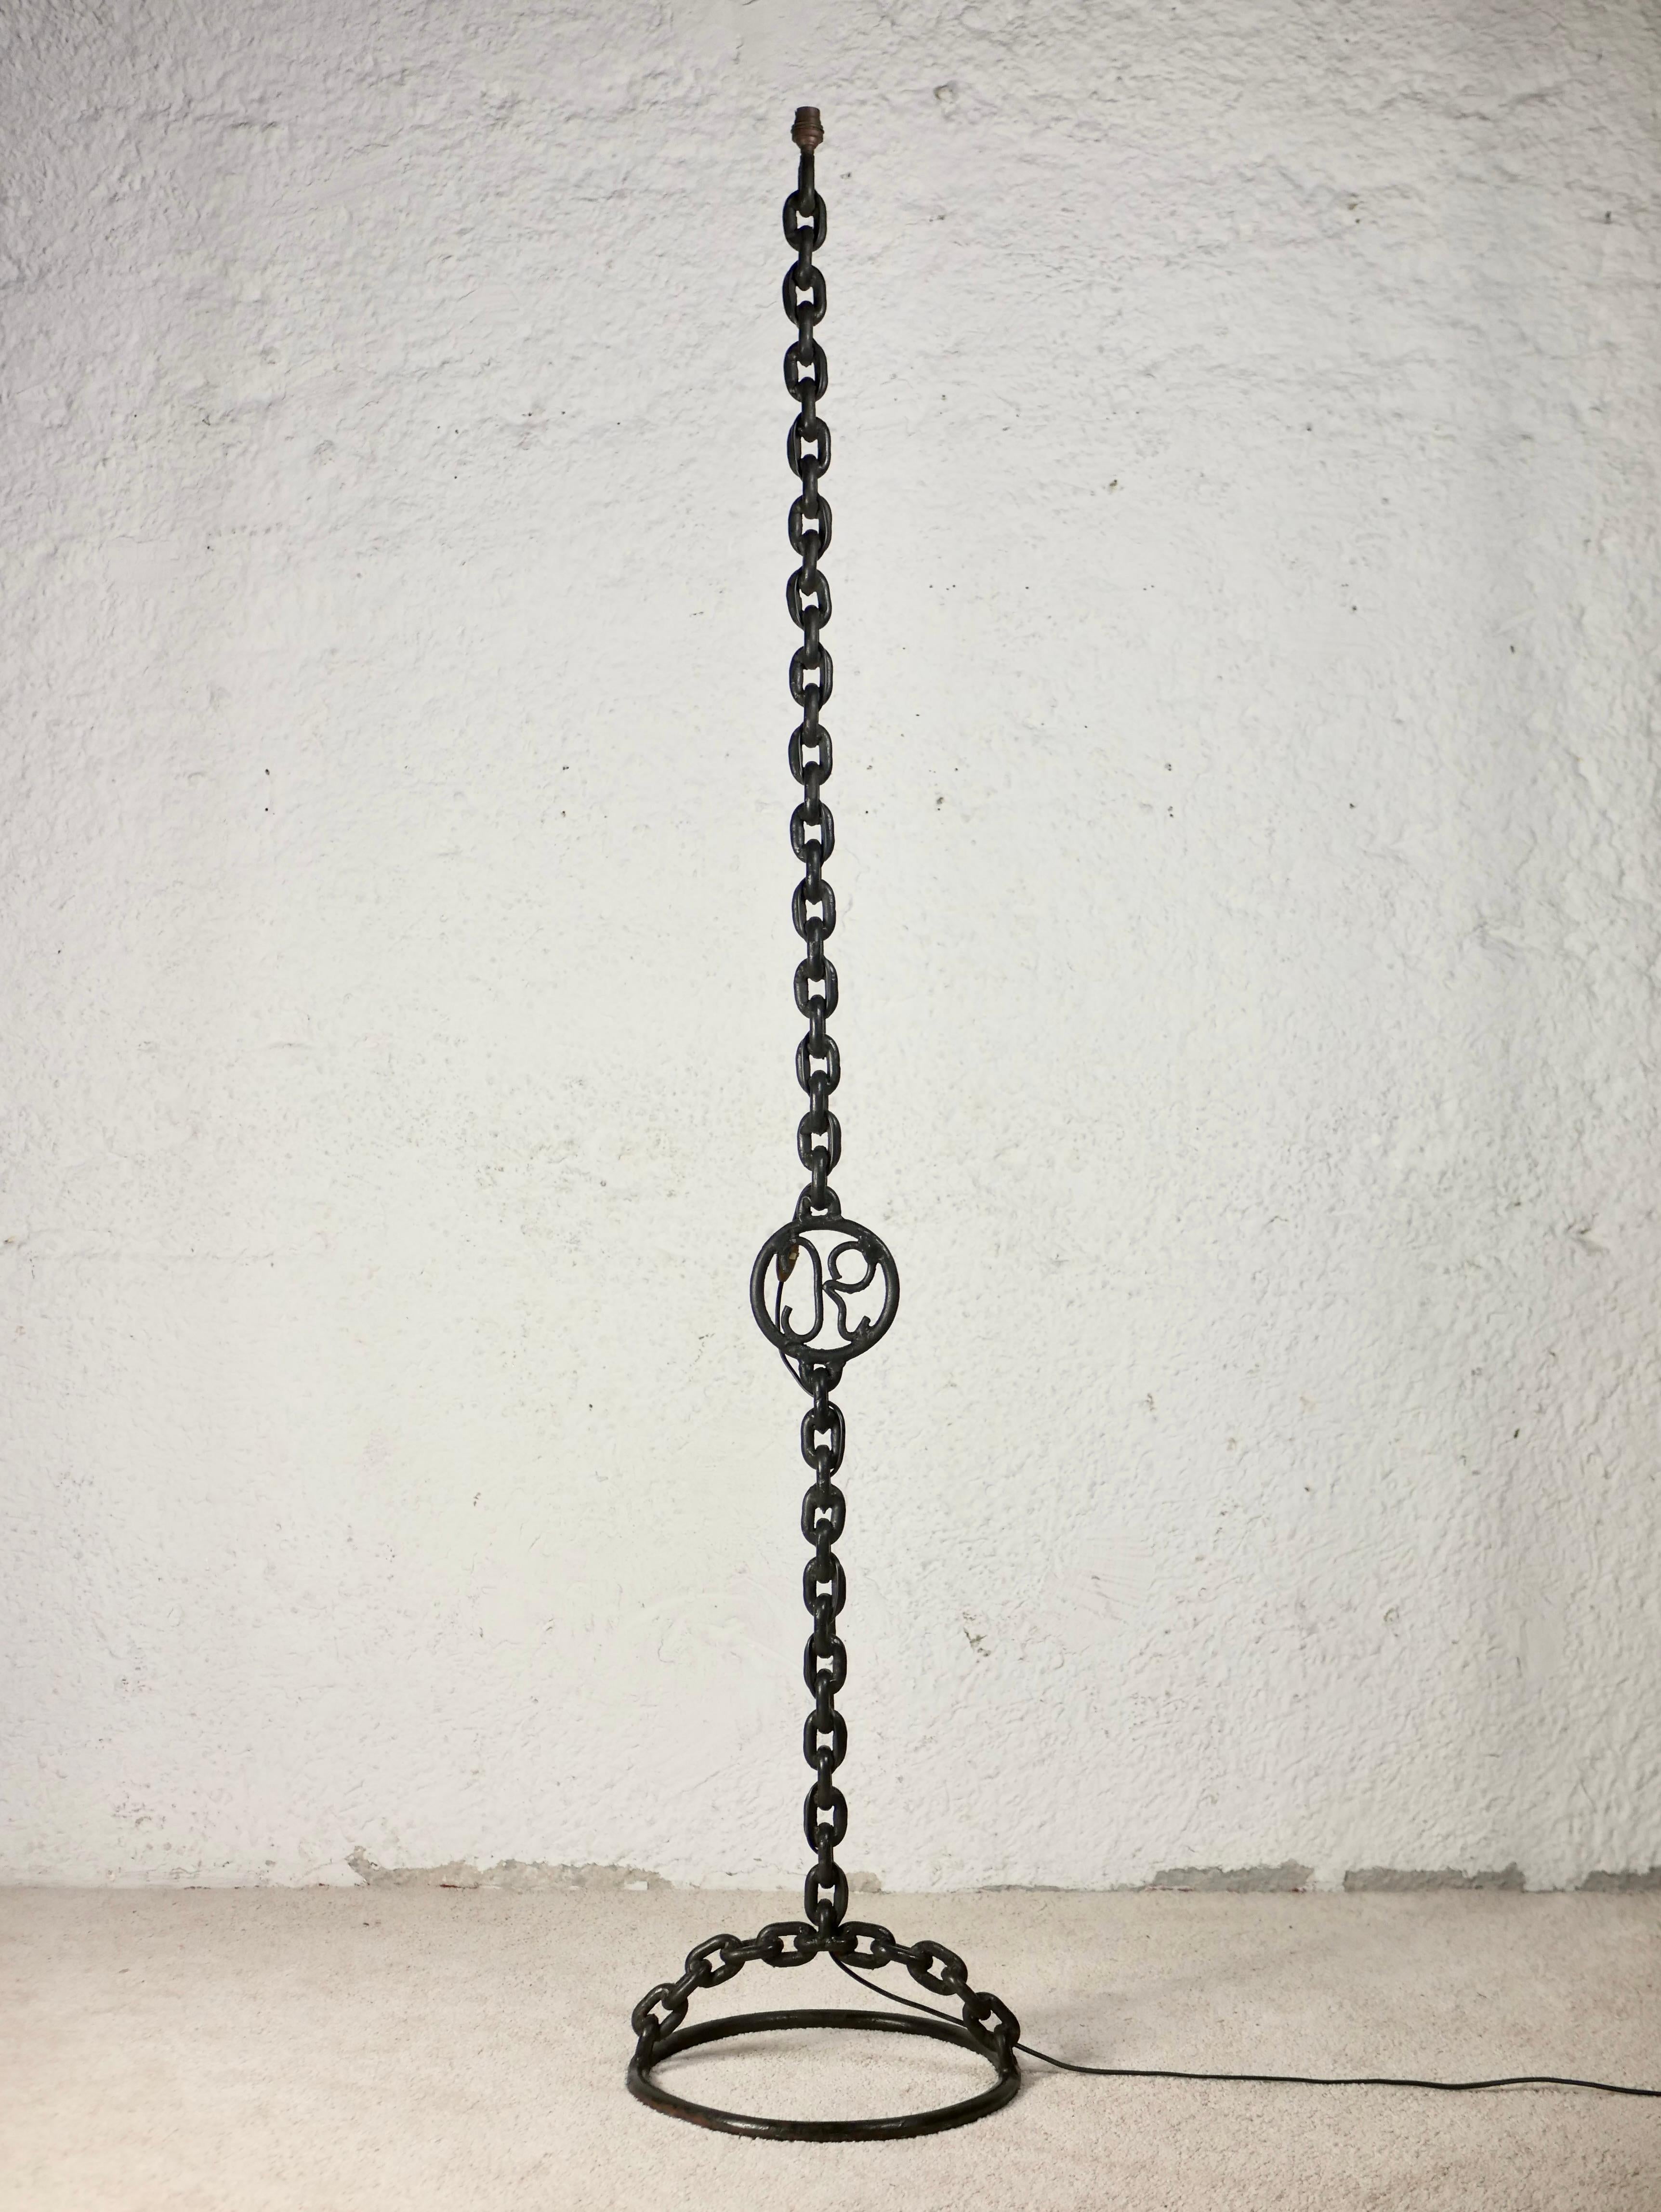 Exceptionnel brutalist floor lamp, anonymous work from the 1940s, made in France.
185cm height floor lamp composed of welded chain, and featuring a mysterious 